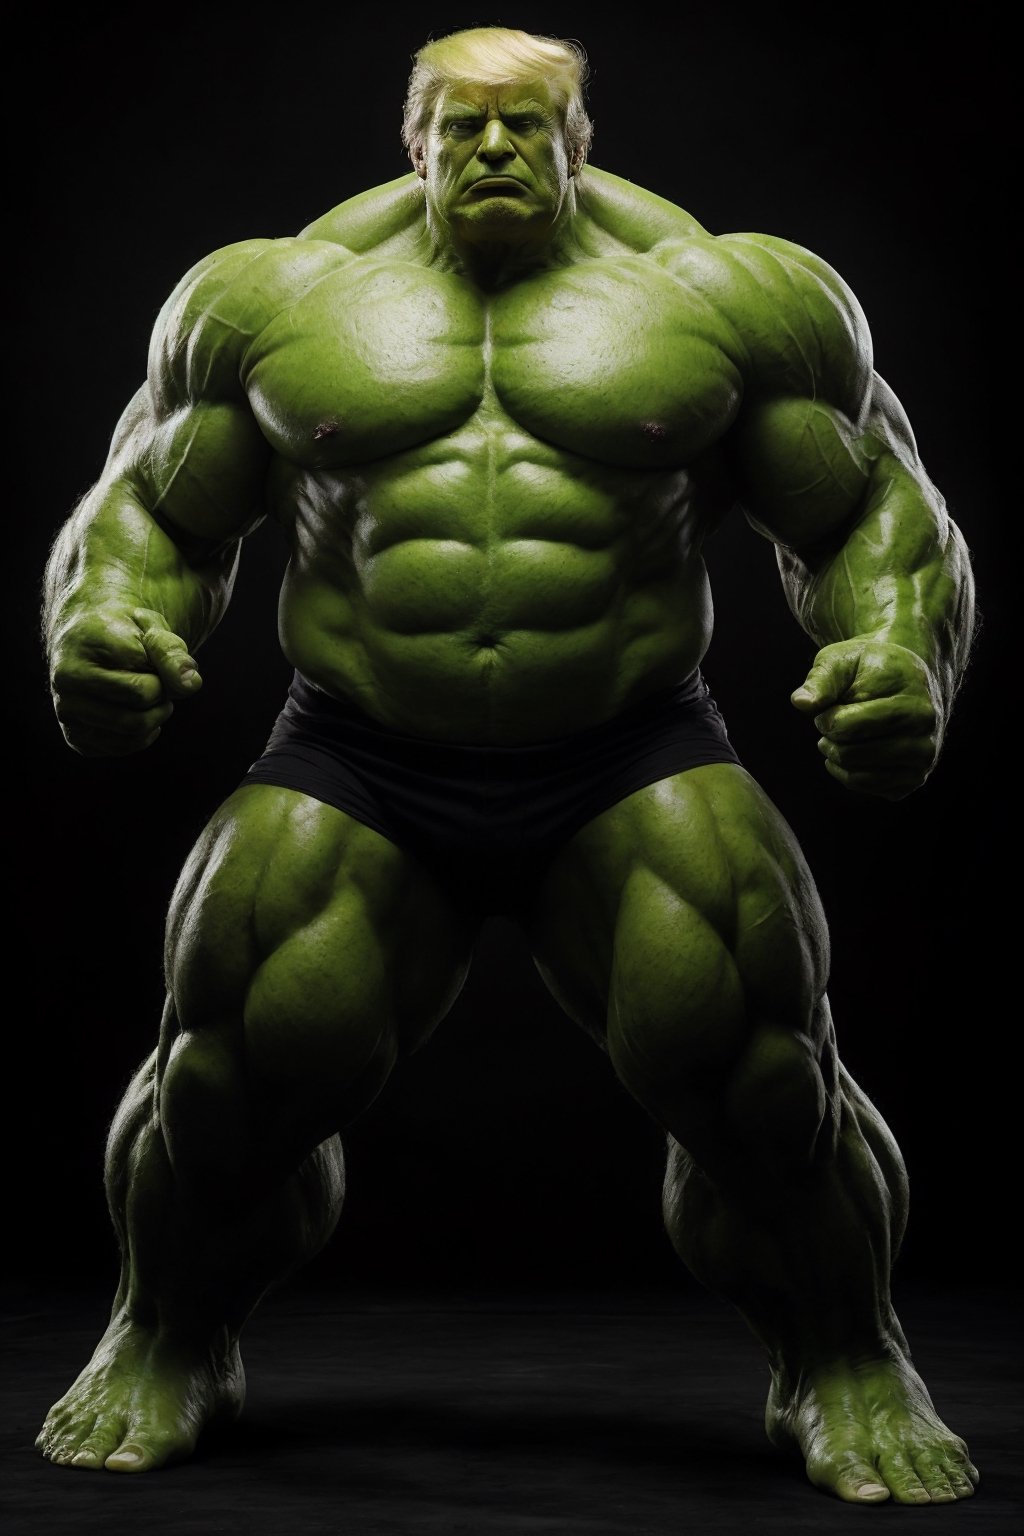 Photograph of full body portrait of Trump as The Hulk